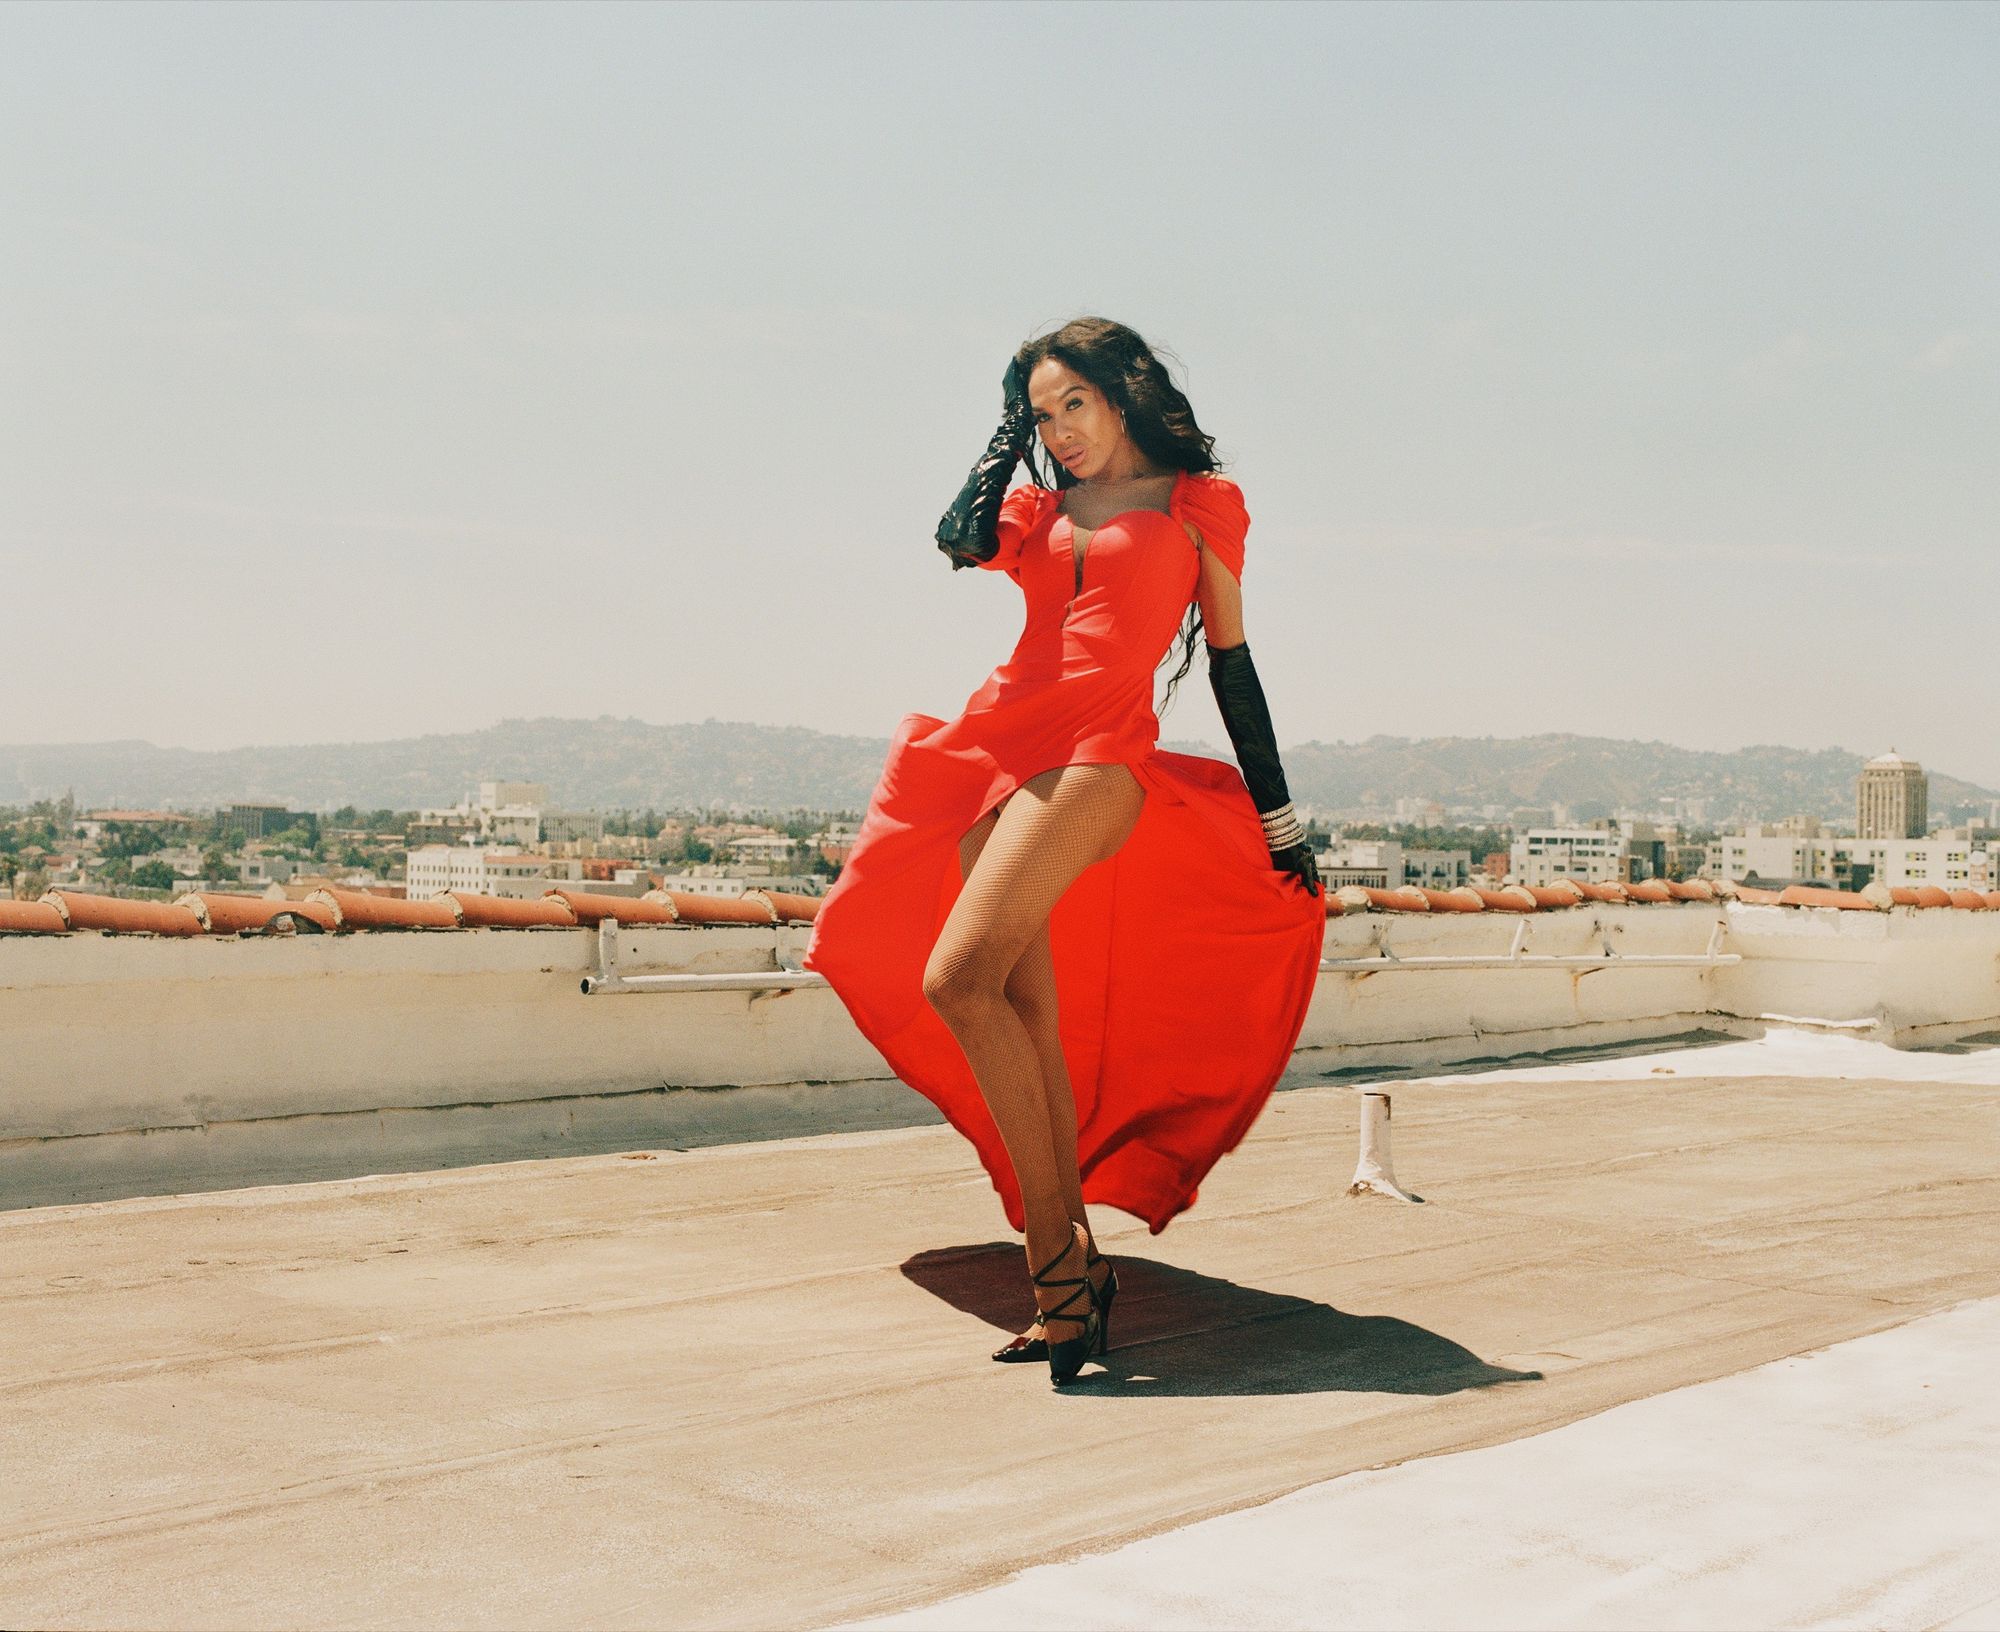 Gia Banks posing on rooftop in red dress (photography by Texas Isaiah)